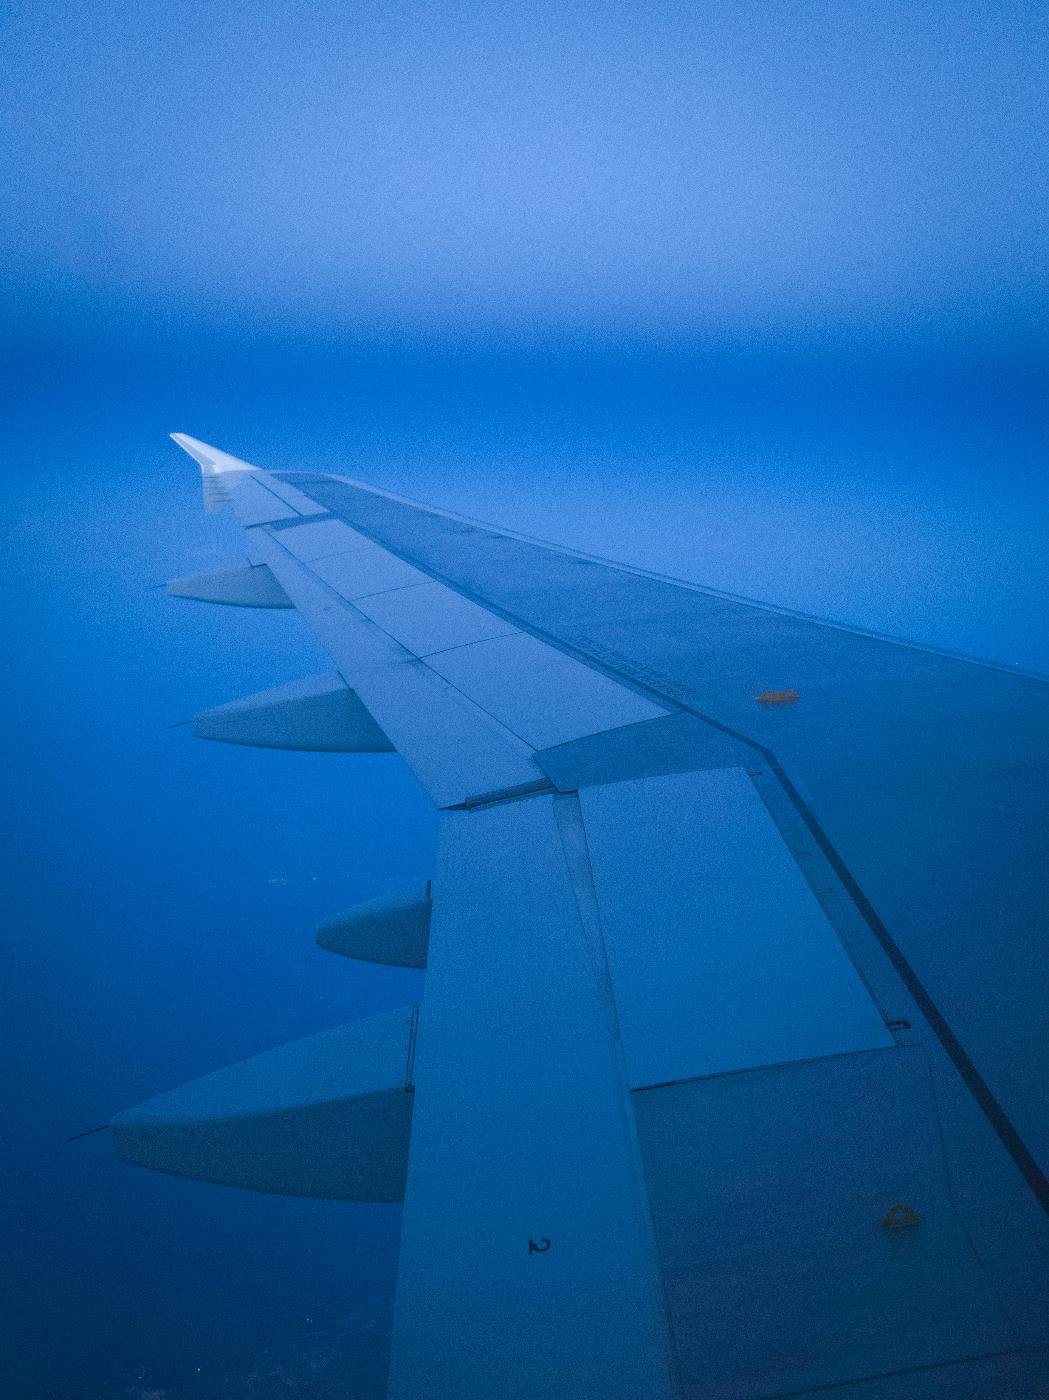 Wing of a jet